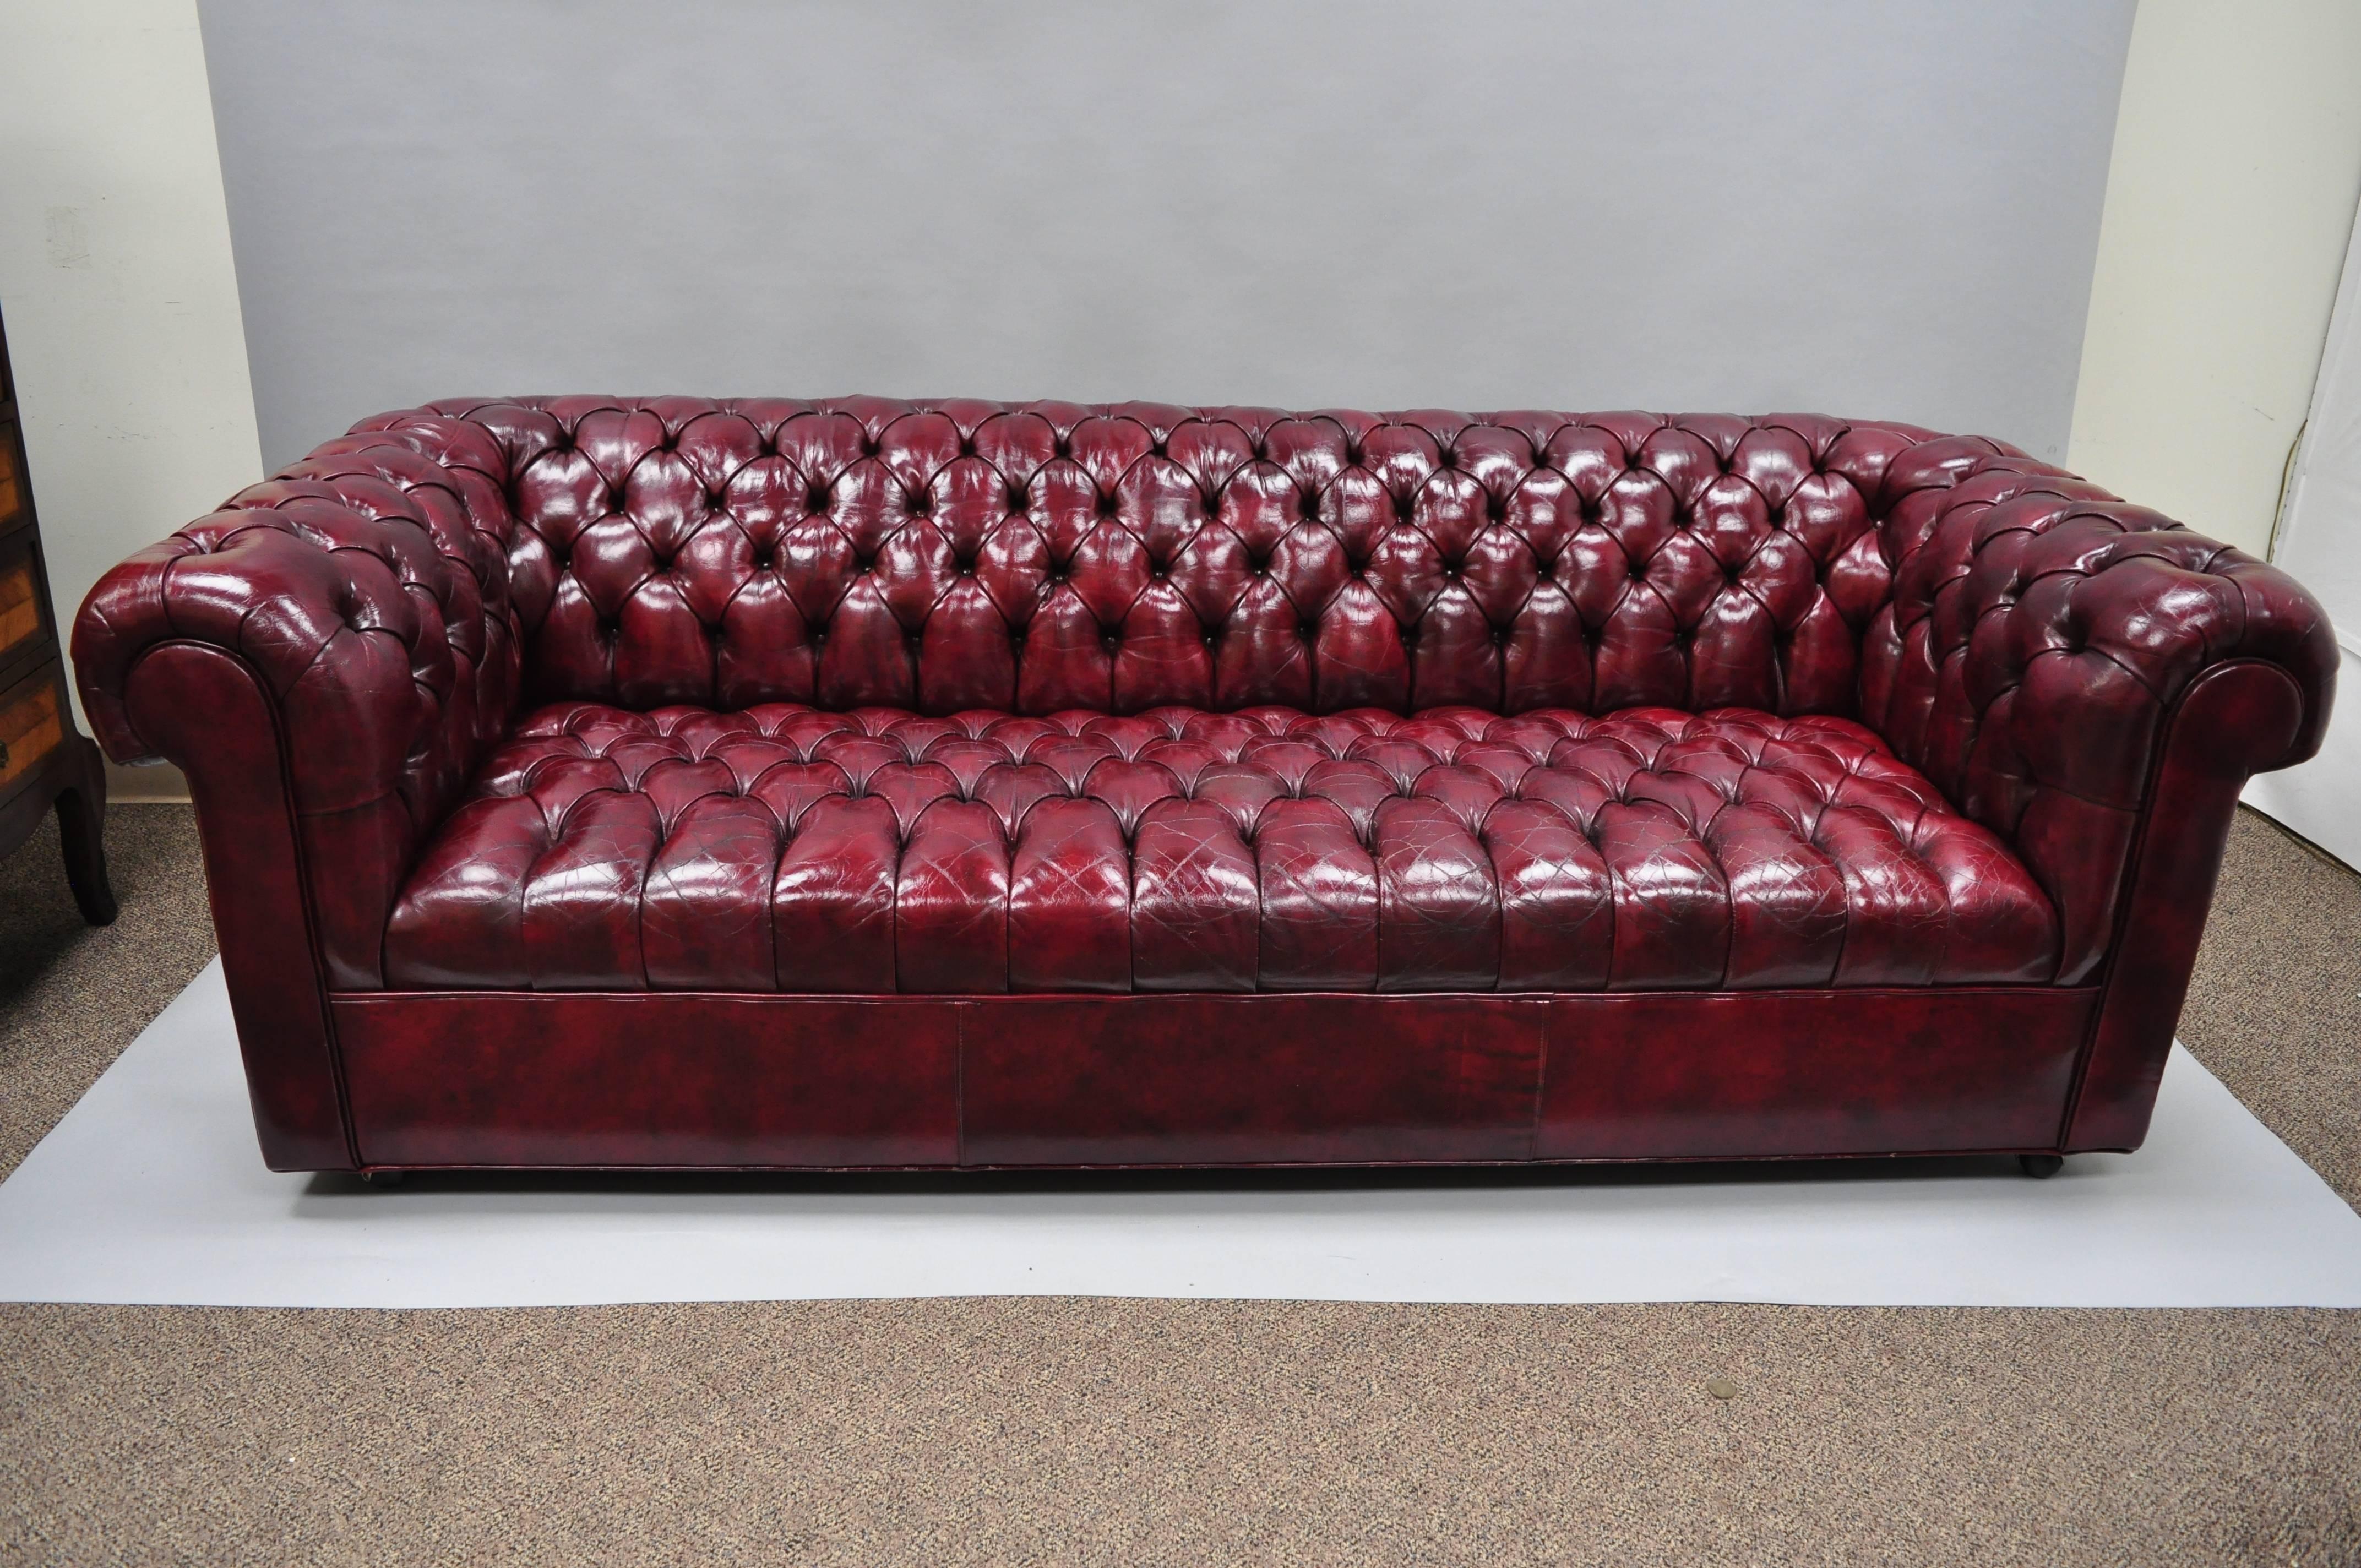 Large Oxblood Burgundy Red Leather Button Tufted Chesterfield Sofa 8